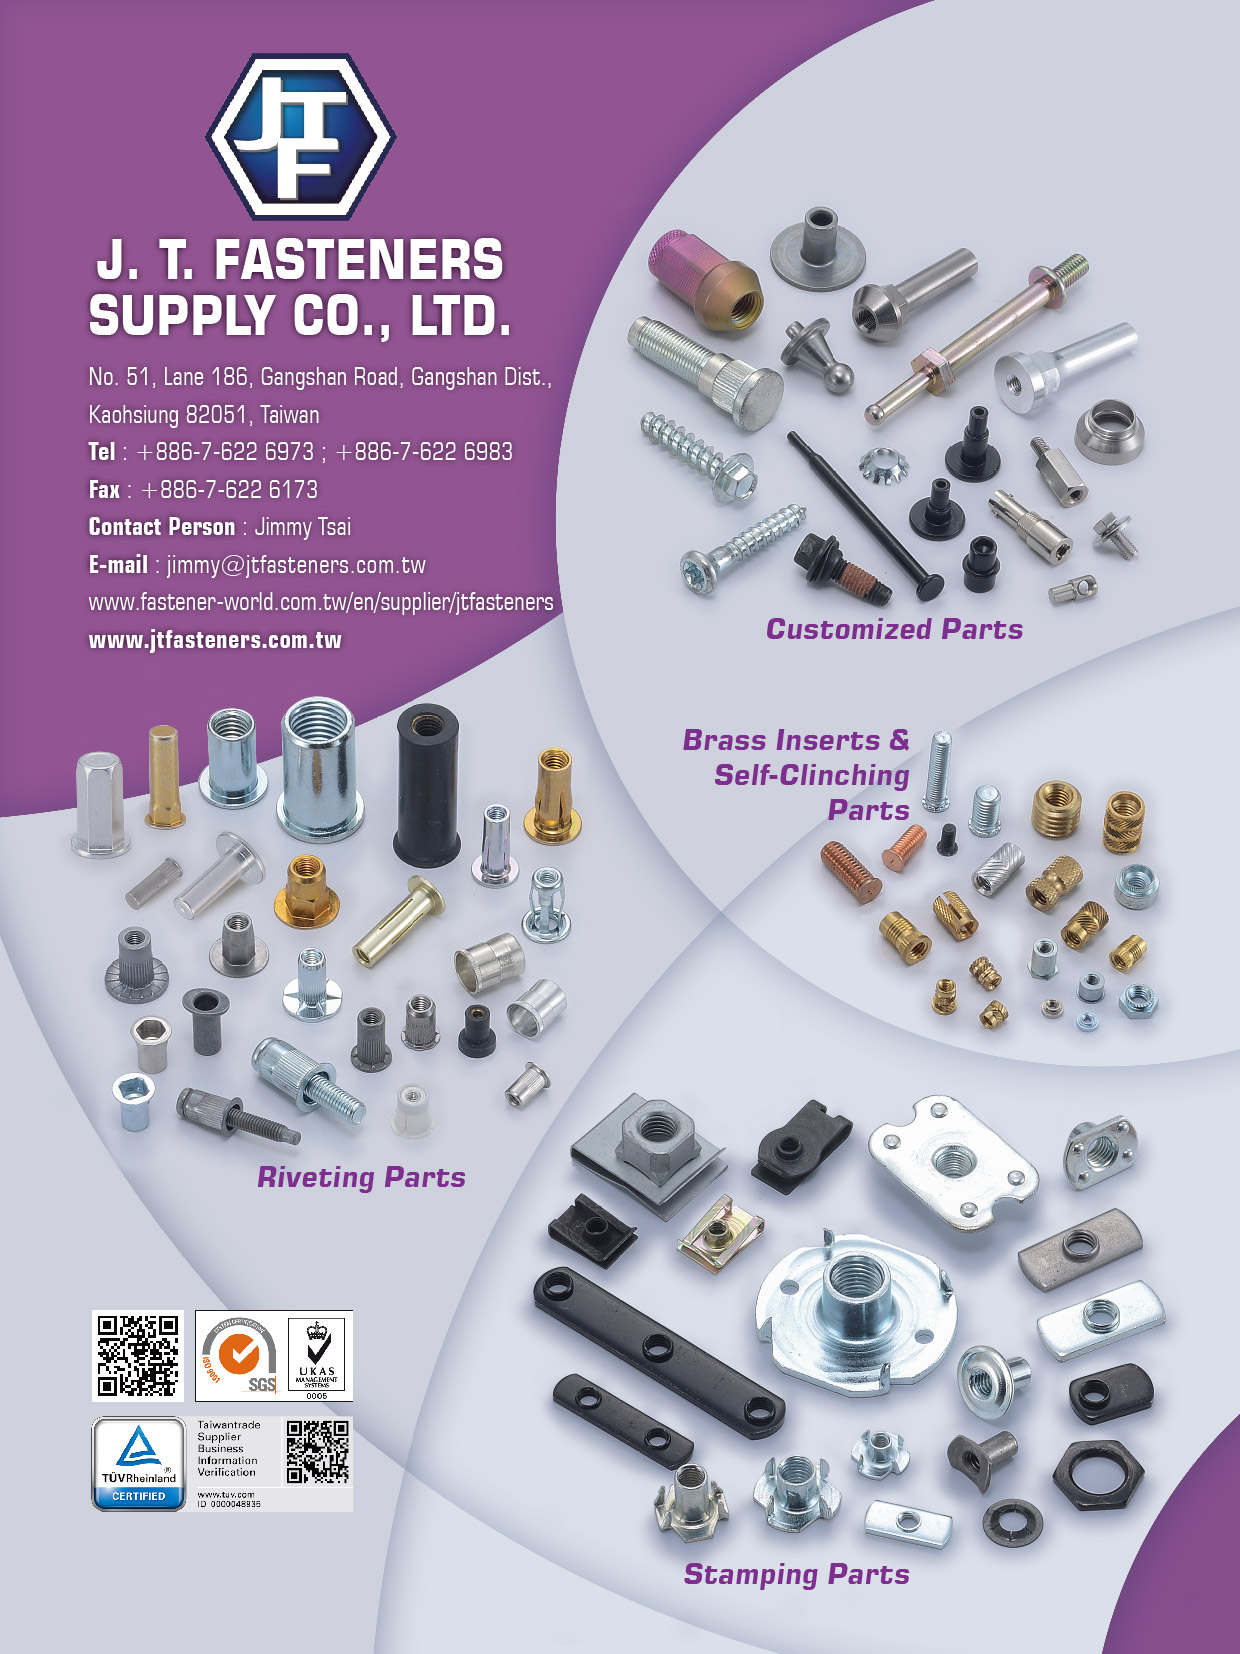 J. T. FASTENERS SUPPLY CO., LTD.  Online Catalogues